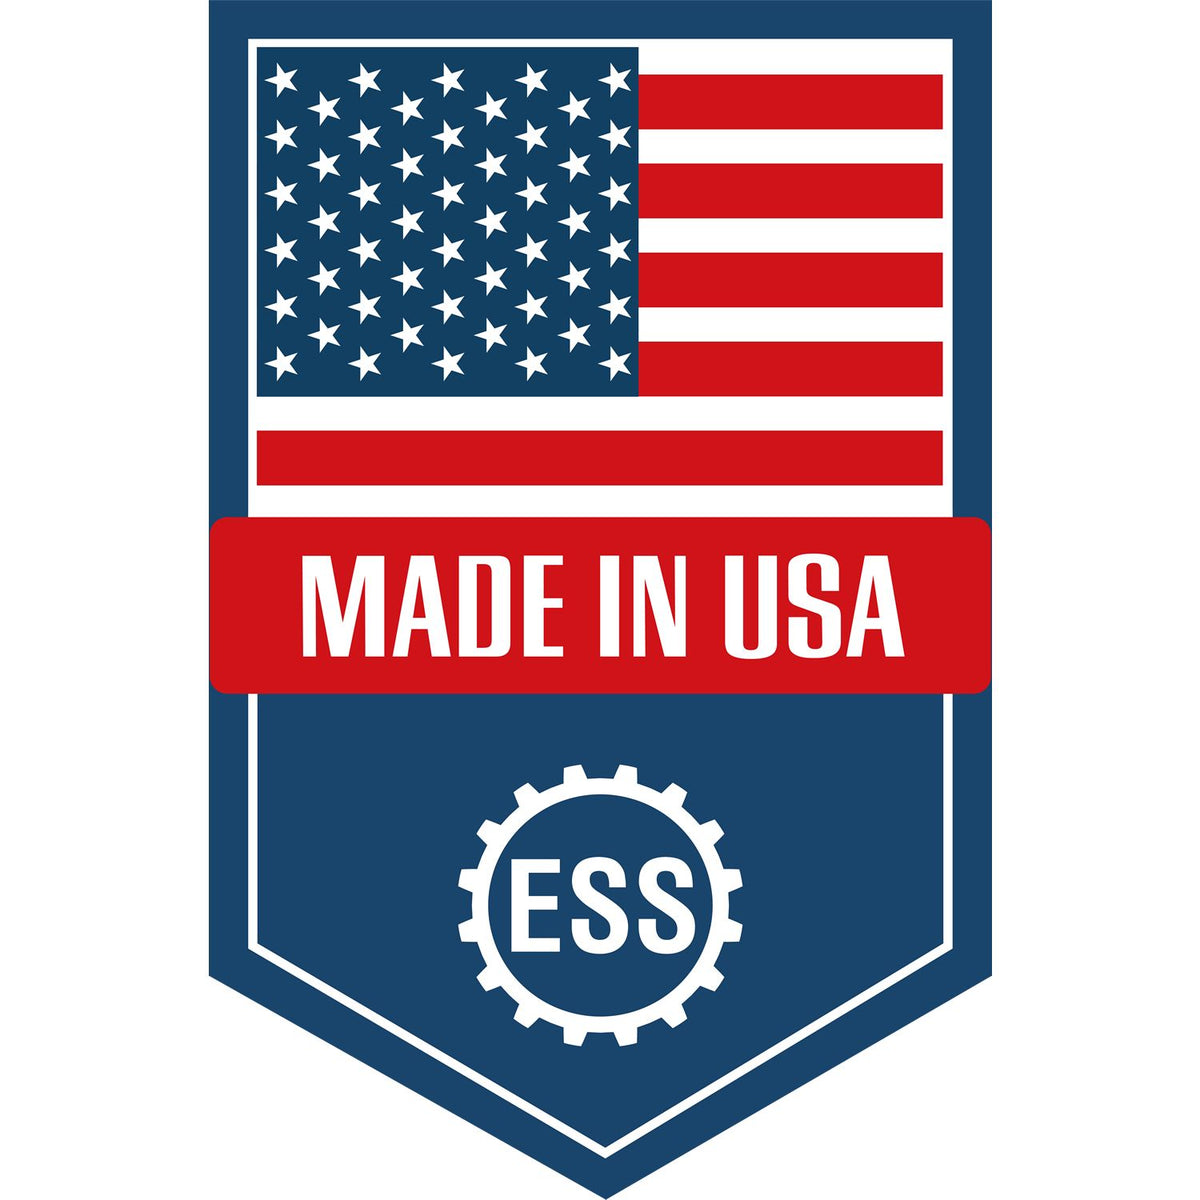 An icon or graphic with an american flag and text reading Made in USA for the Slim Pre-Inked Wisconsin Landscape Architect Seal Stamp